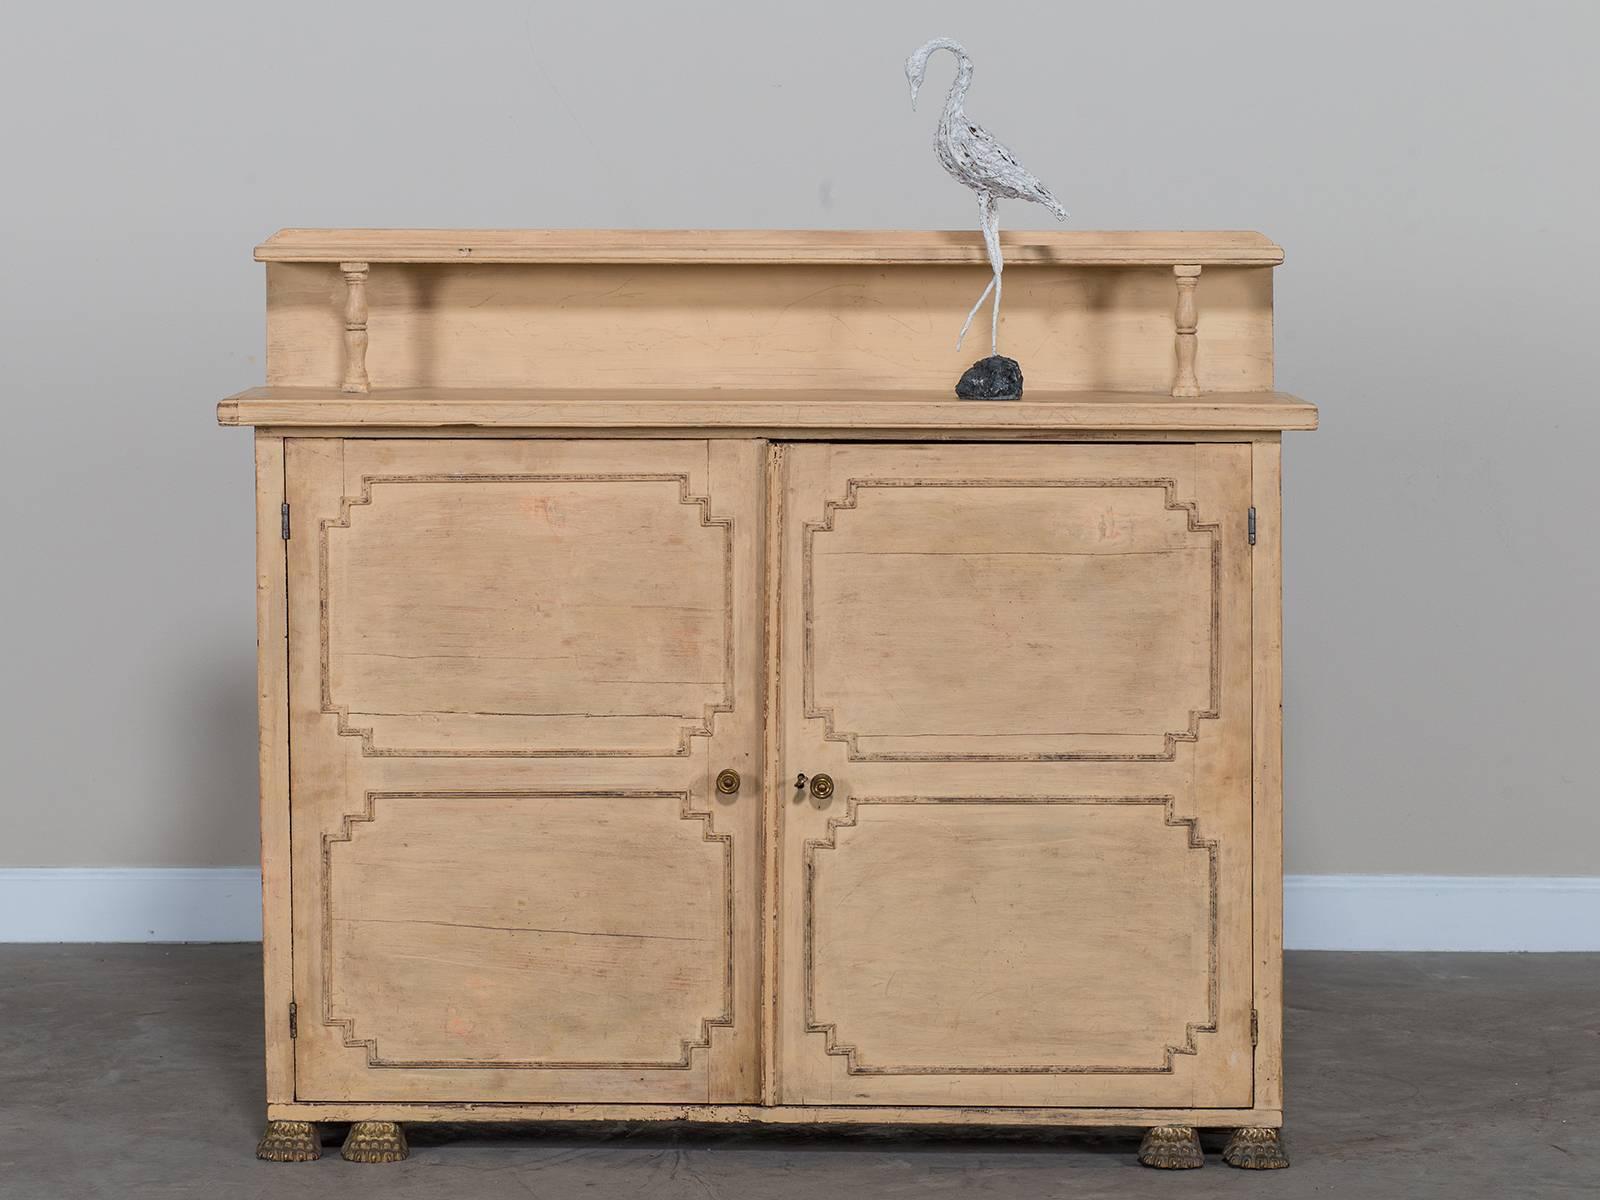 Receive our new selections direct from 1stdibs by email each week. Please click Follow Dealer below and see them first!

This antique English chiffonier dates from the Regency period circa 1830 and is notable for its painted finish and brass paw